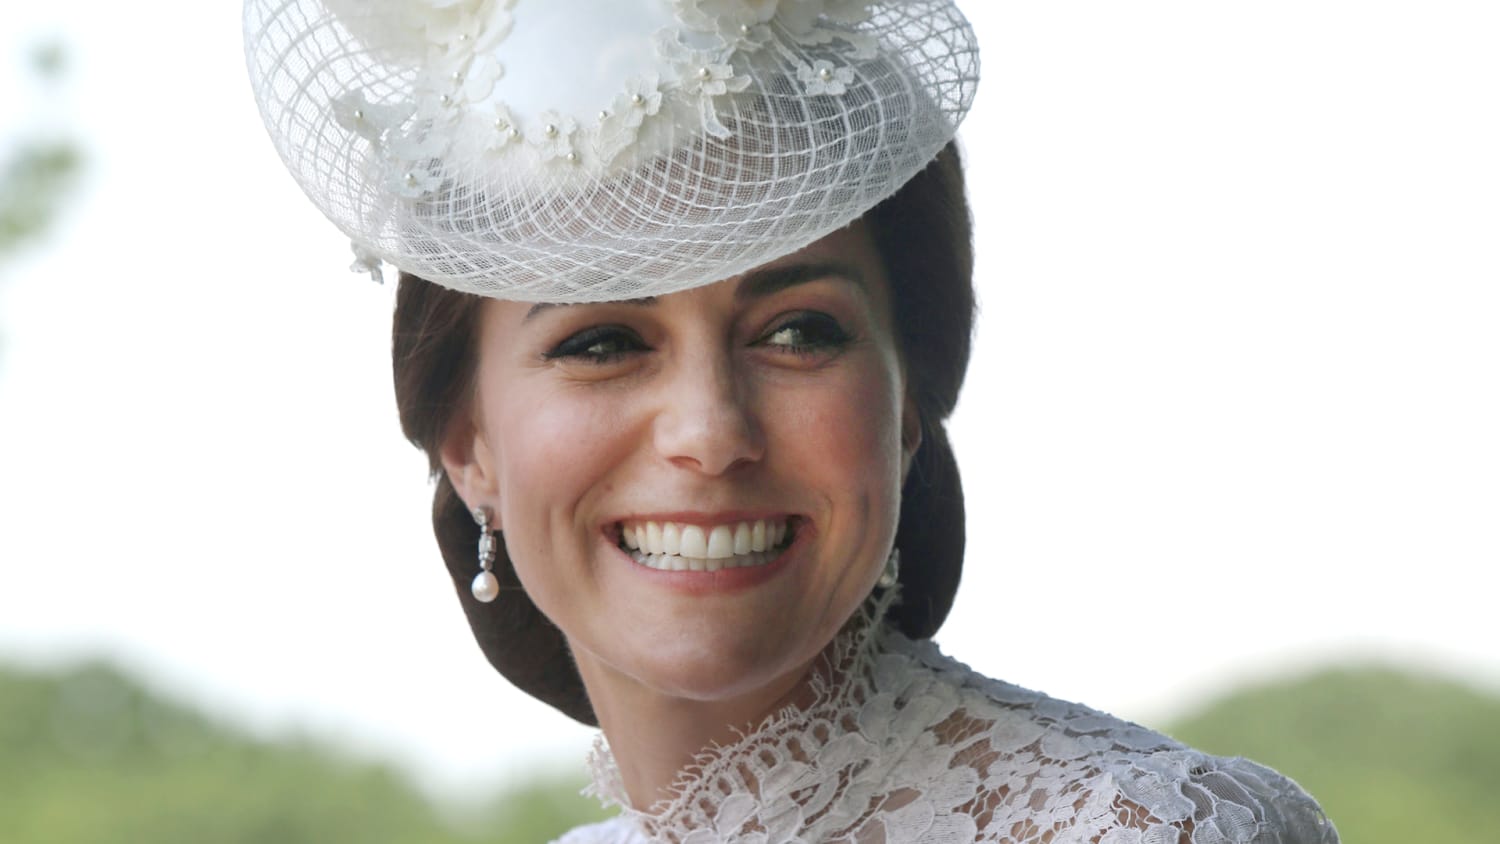 Former Kate Middleton attends Royal Ascot's opening wearing lace